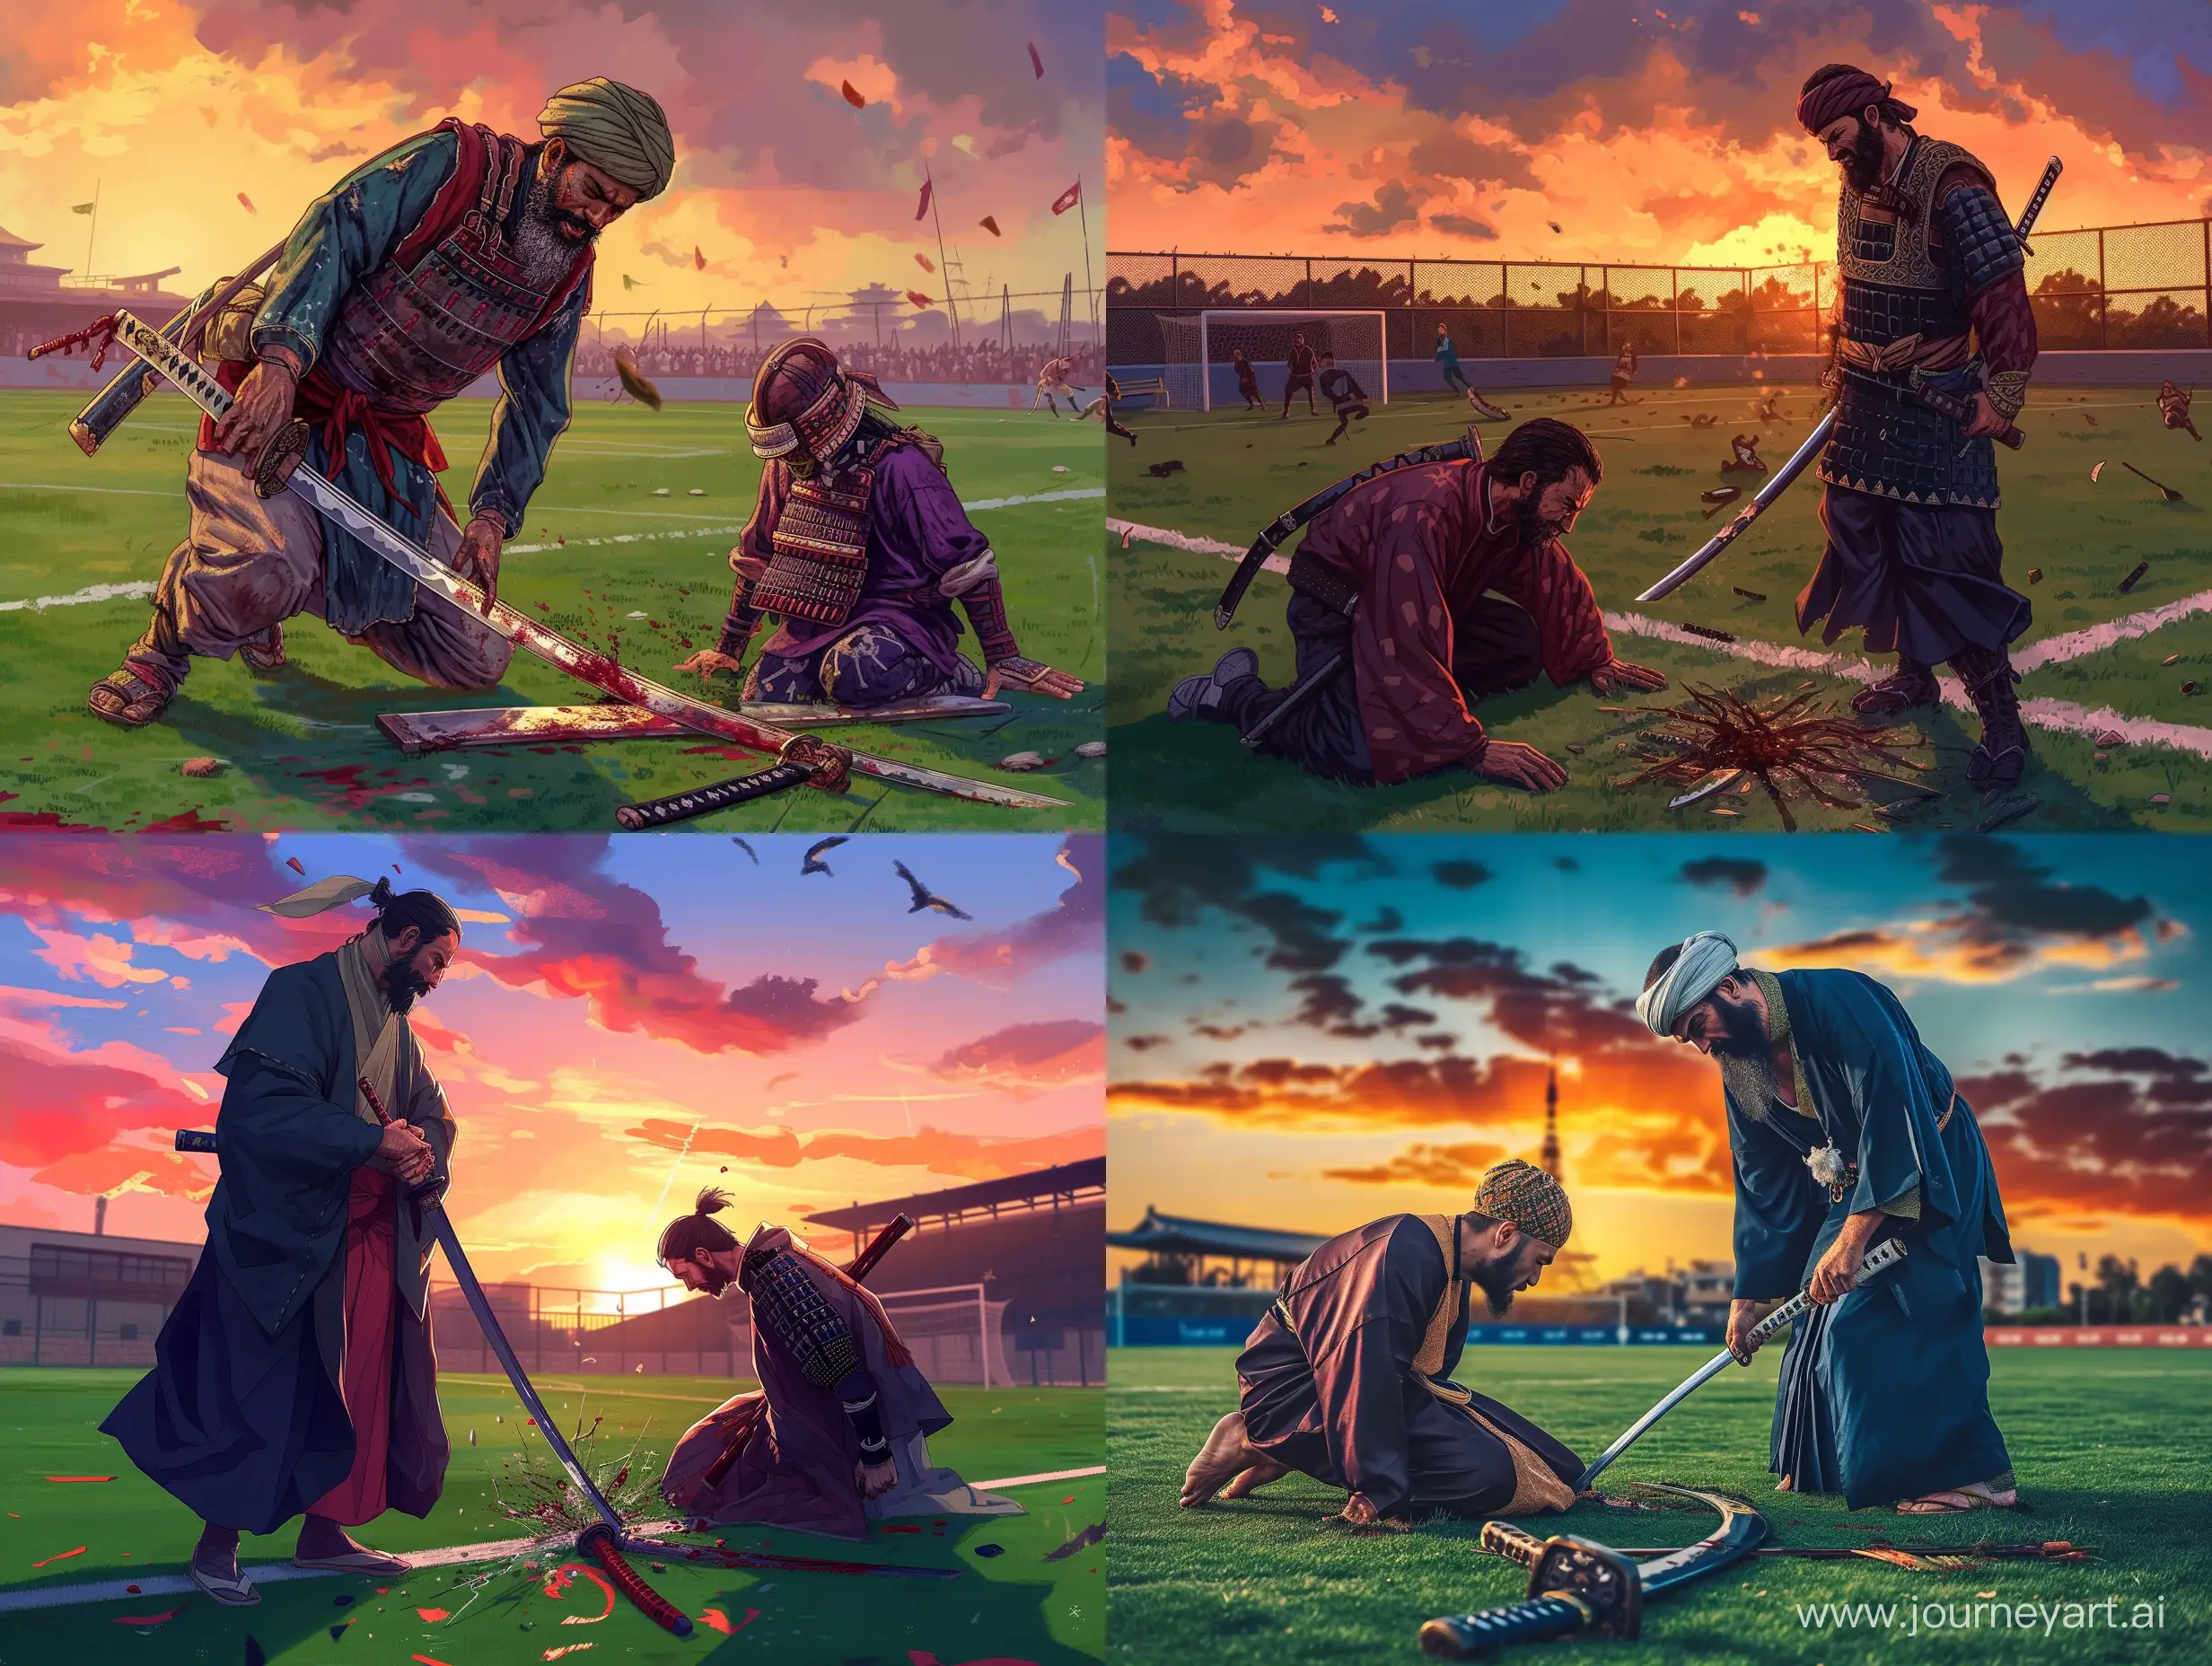 Persian-Prince-Confronts-Despairing-Samurai-on-Soccer-Field-at-Sunset